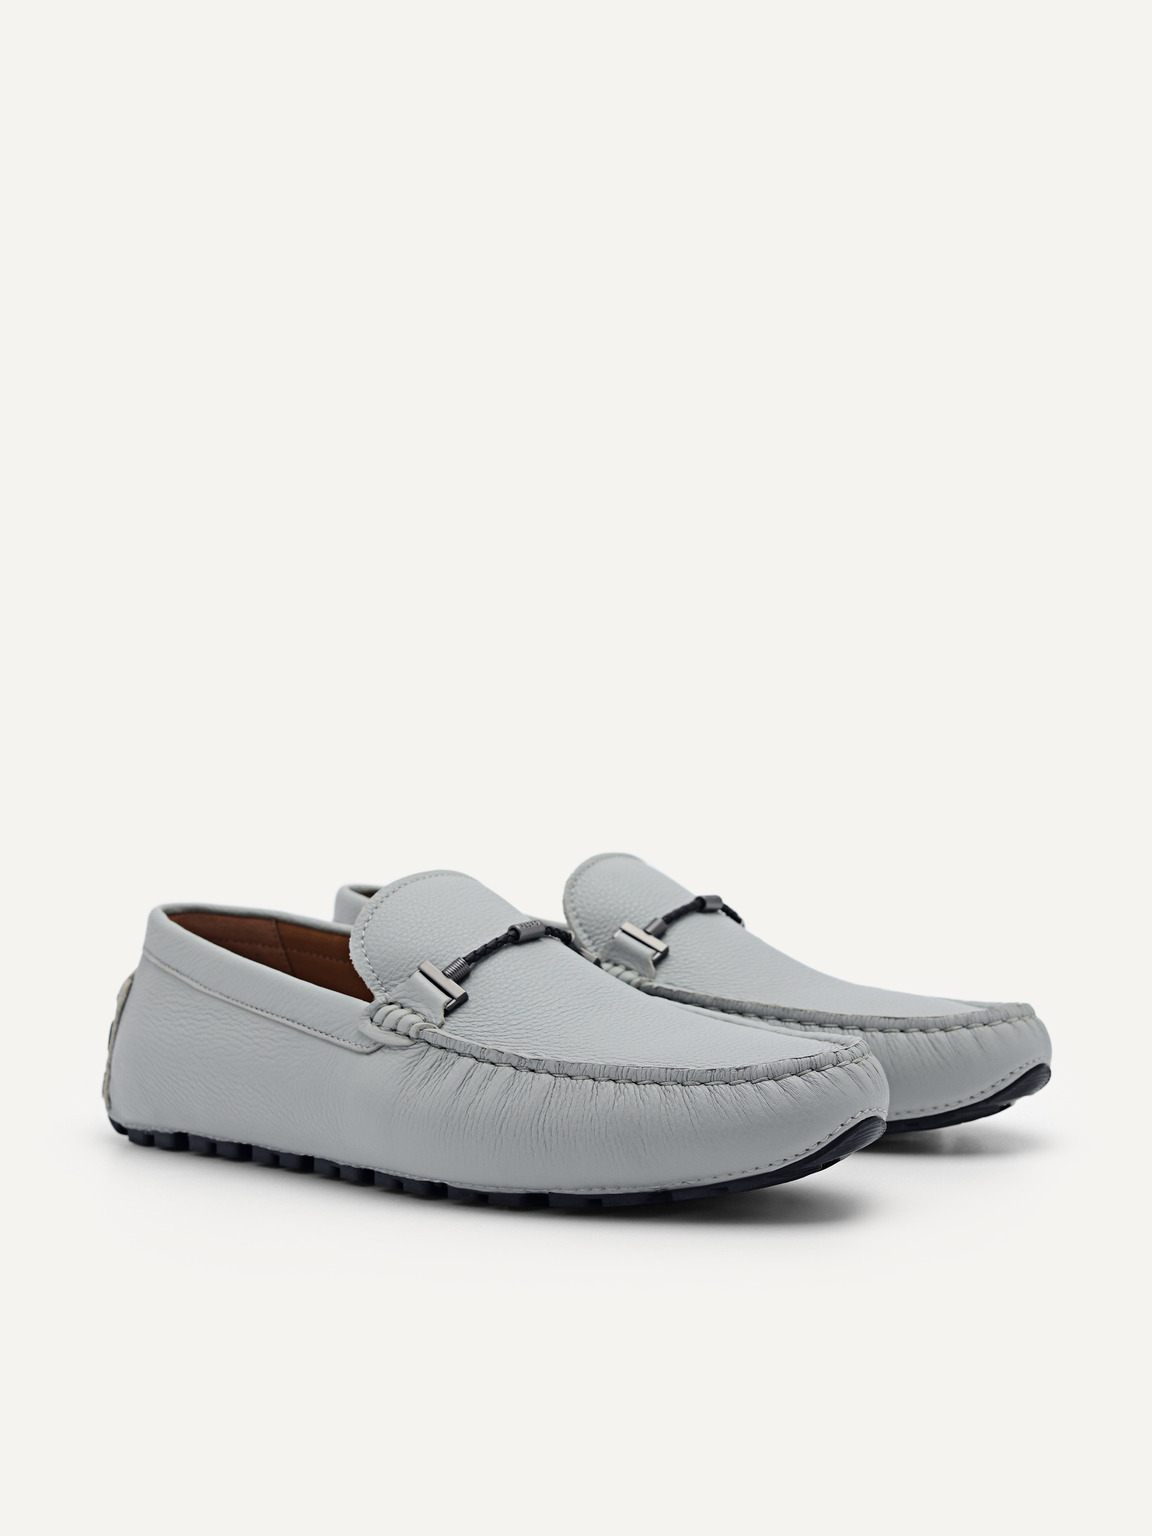 Robert Leather Driving Shoes, Light Grey